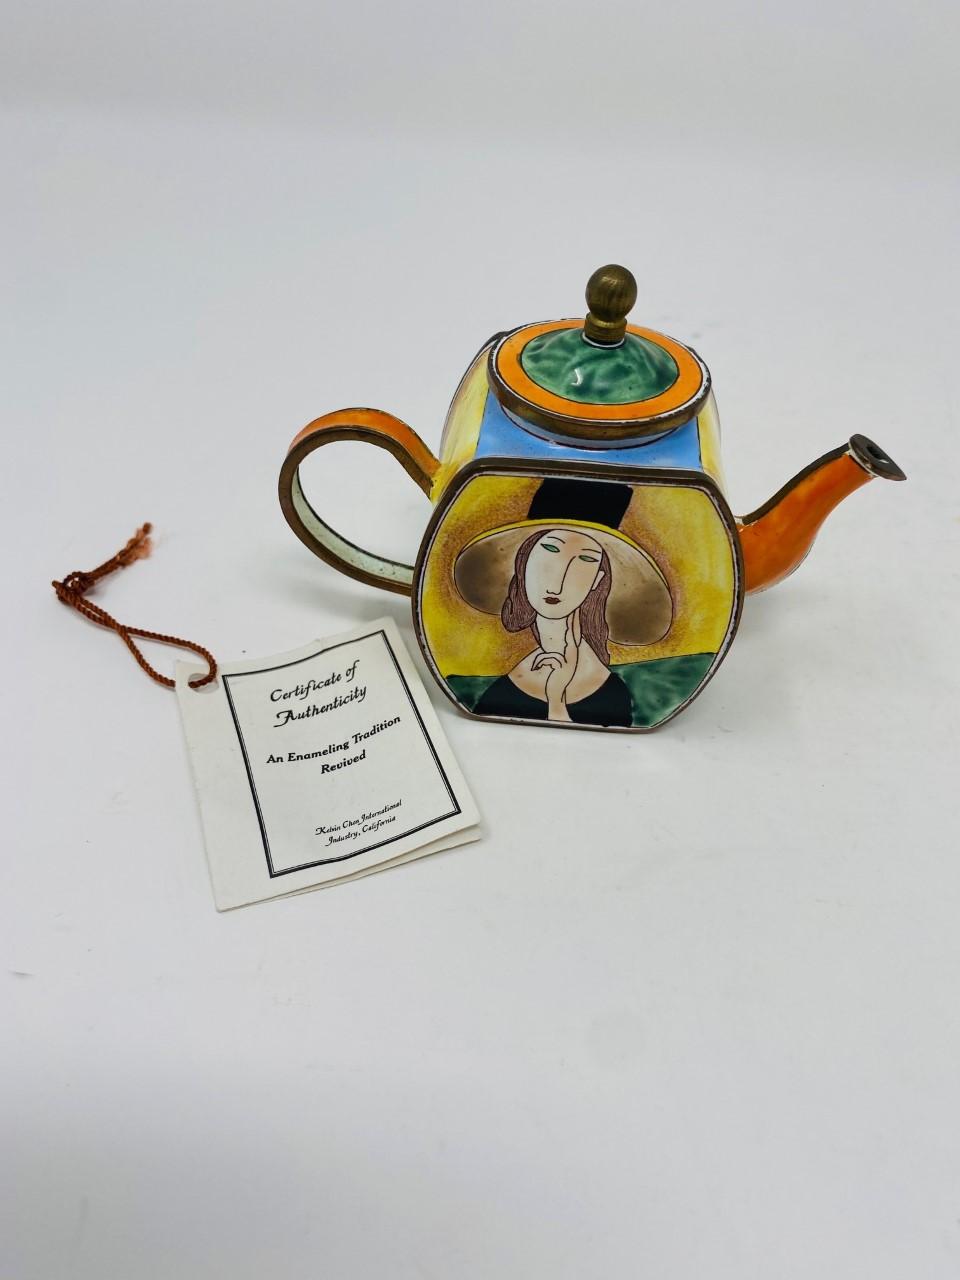 Hand-Crafted Miniature Enameled Tea Pot Hand Painted Modigliani Lady with Hat by Kelvin Chen